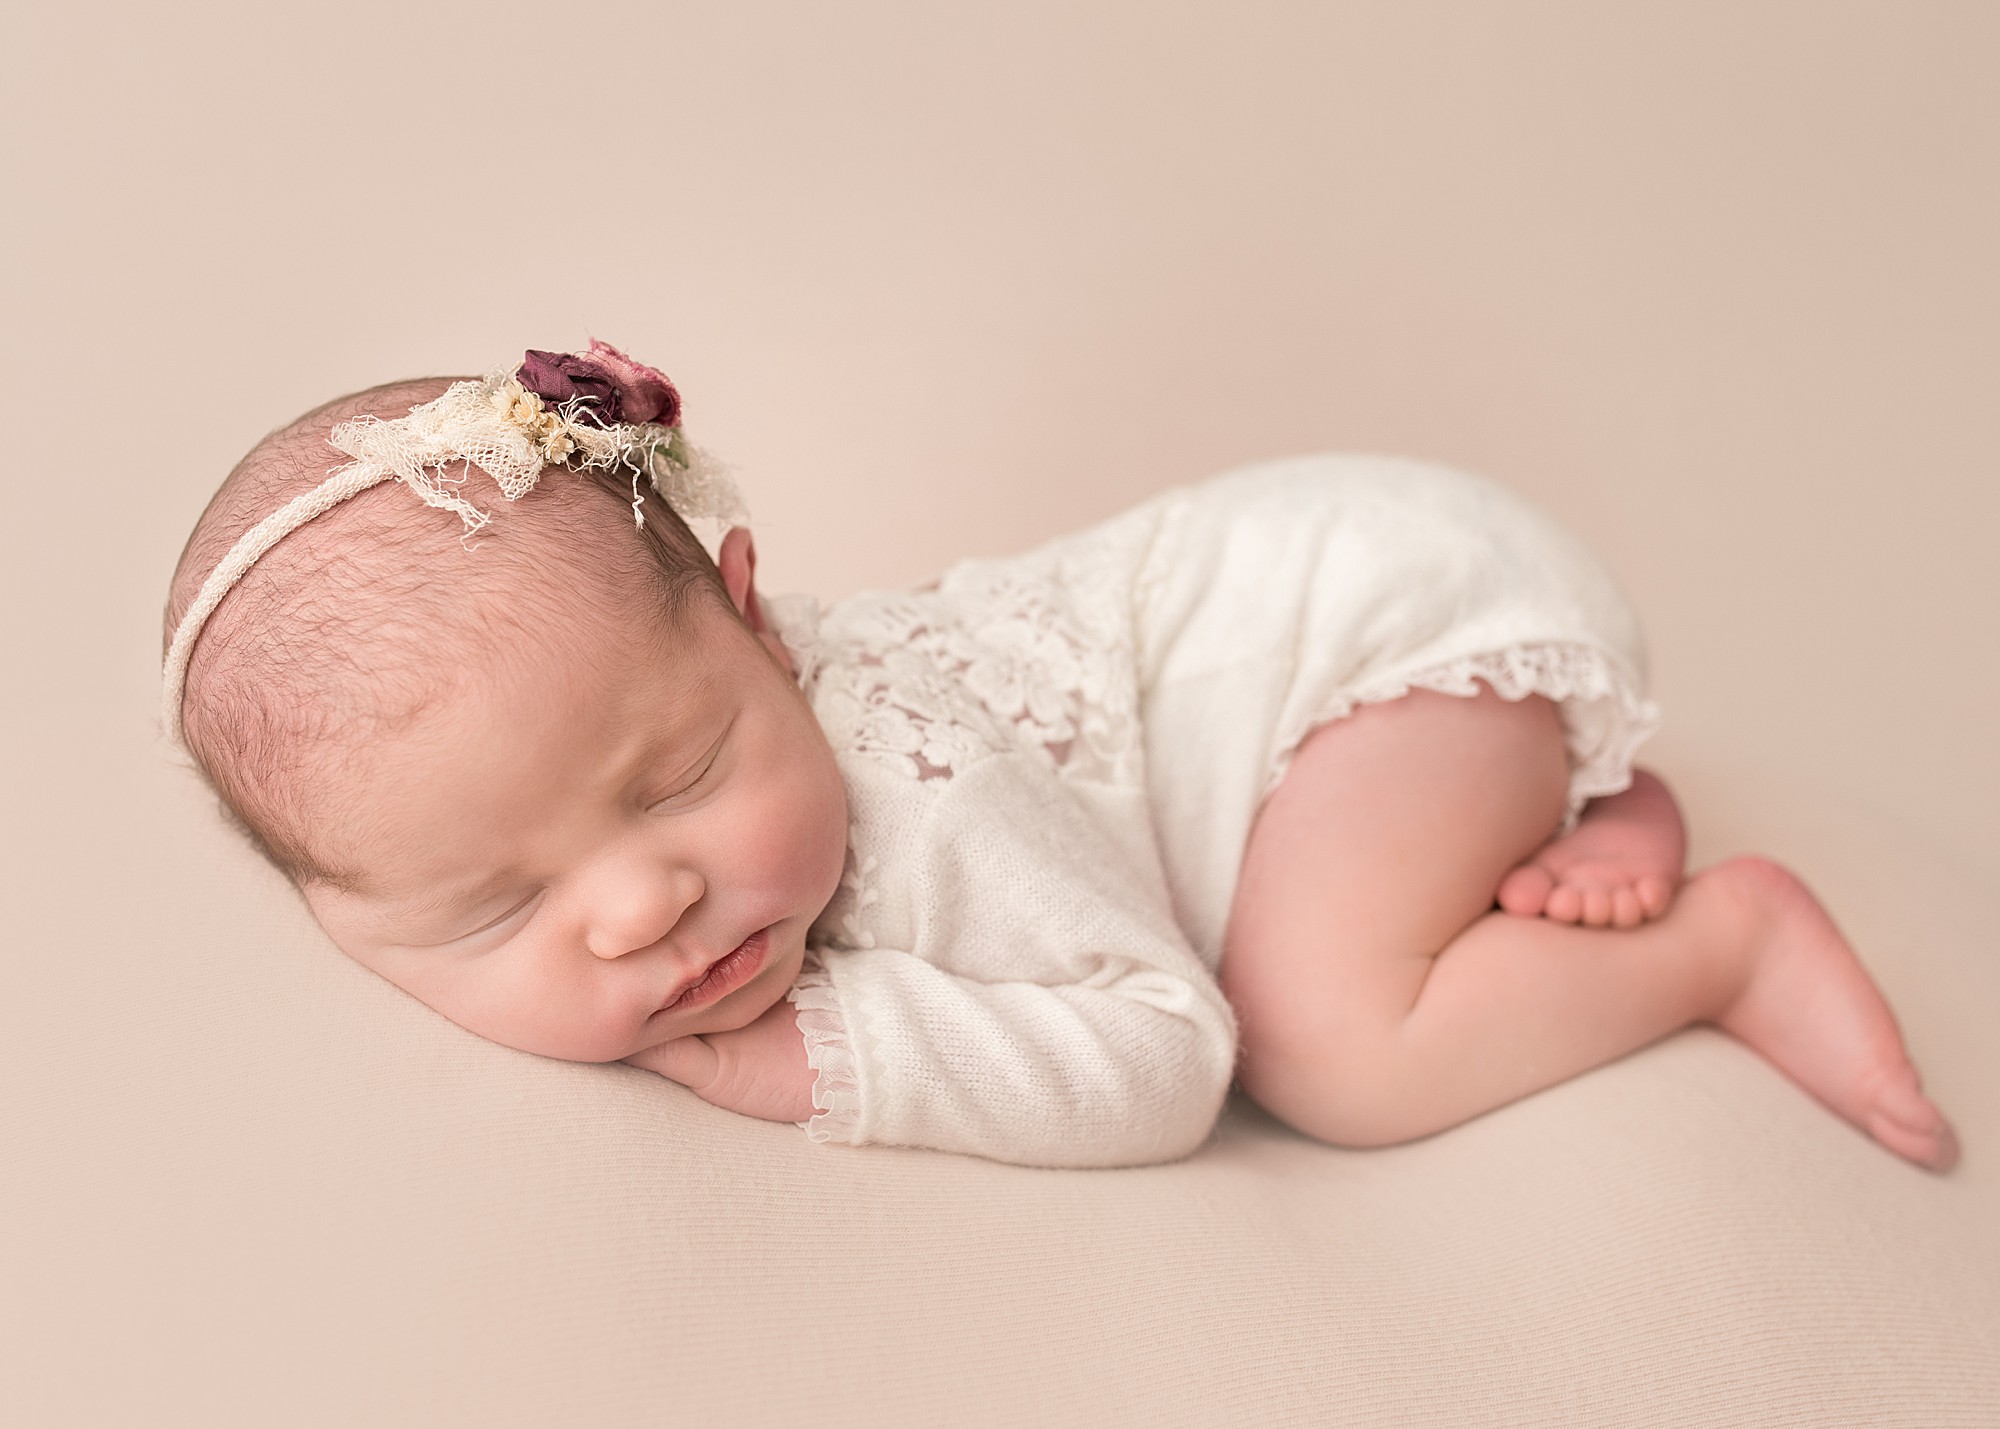 sleeping newborn baby on her tummy in a white outfit and wearing a headband on her head the blanket she is laying on is pink wool